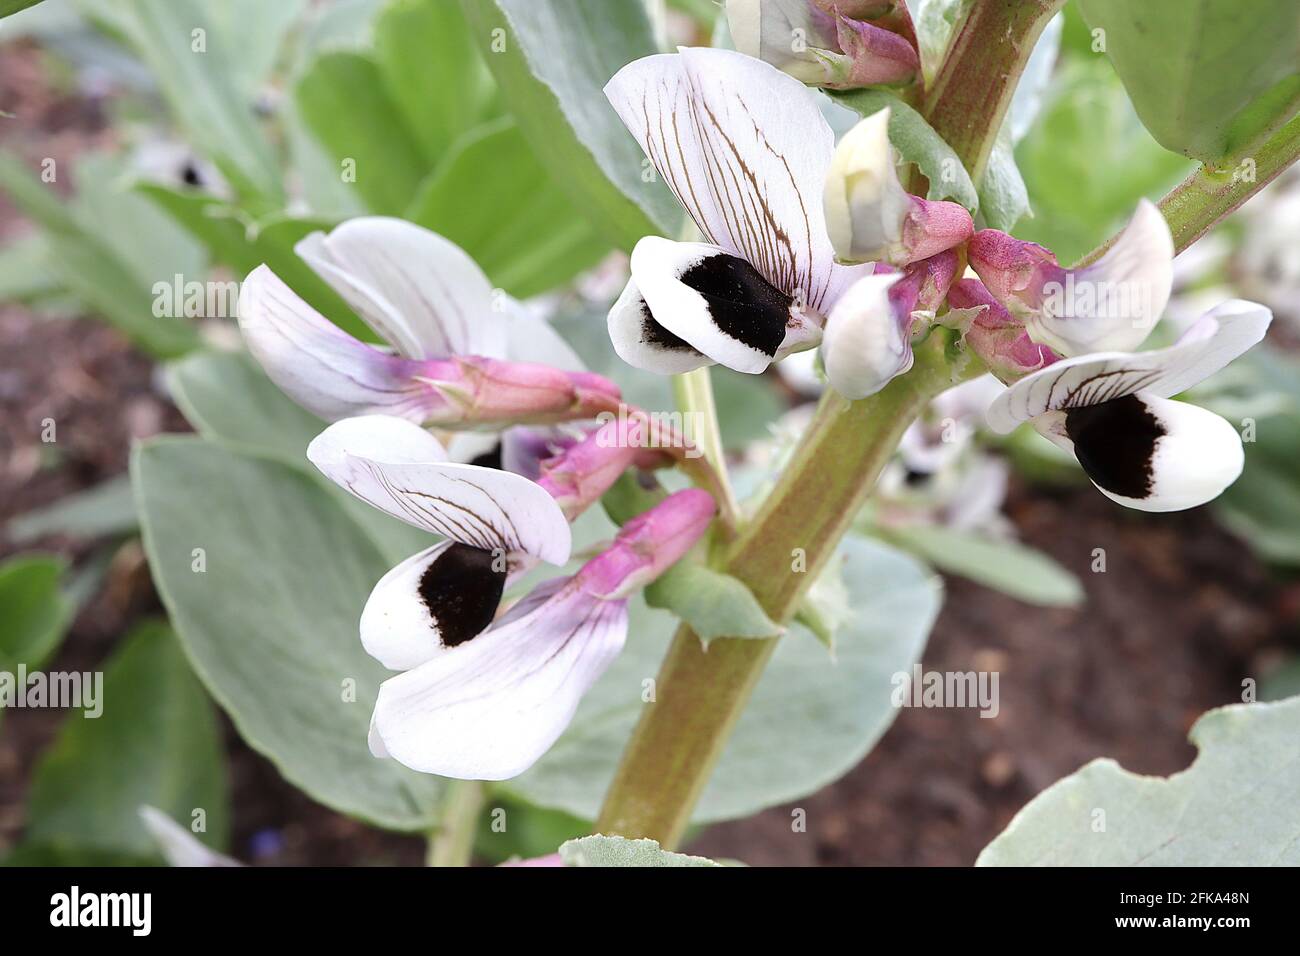 Vicia faba Broad bean plant – white pea-like with black spots and black veins,  April, England, UK Stock Photo